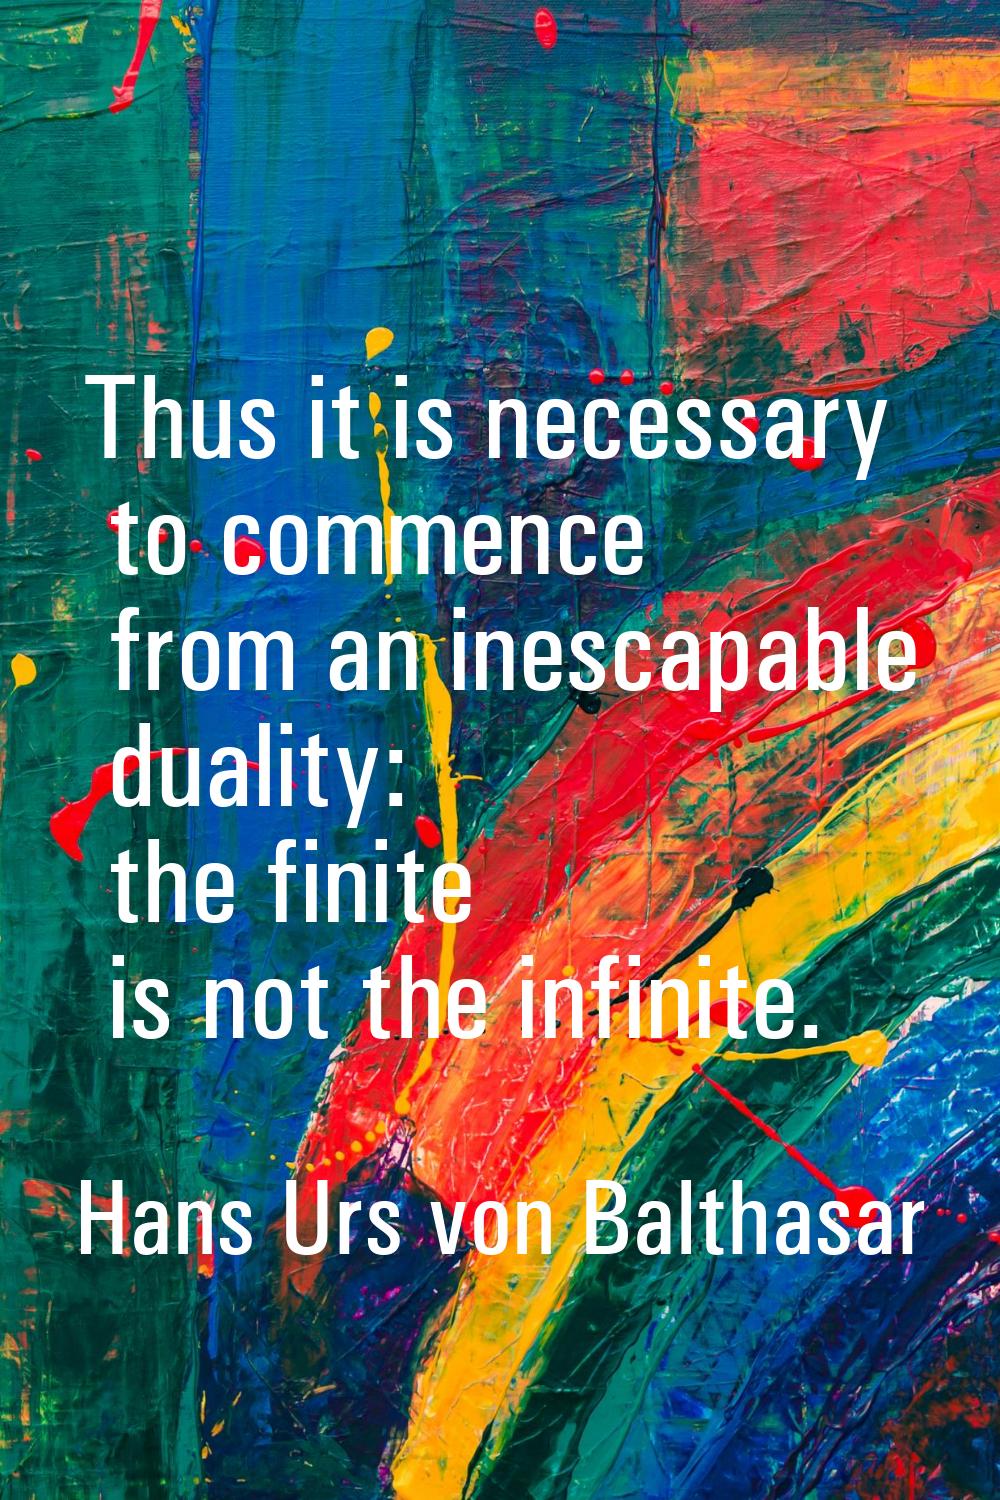 Thus it is necessary to commence from an inescapable duality: the finite is not the infinite.